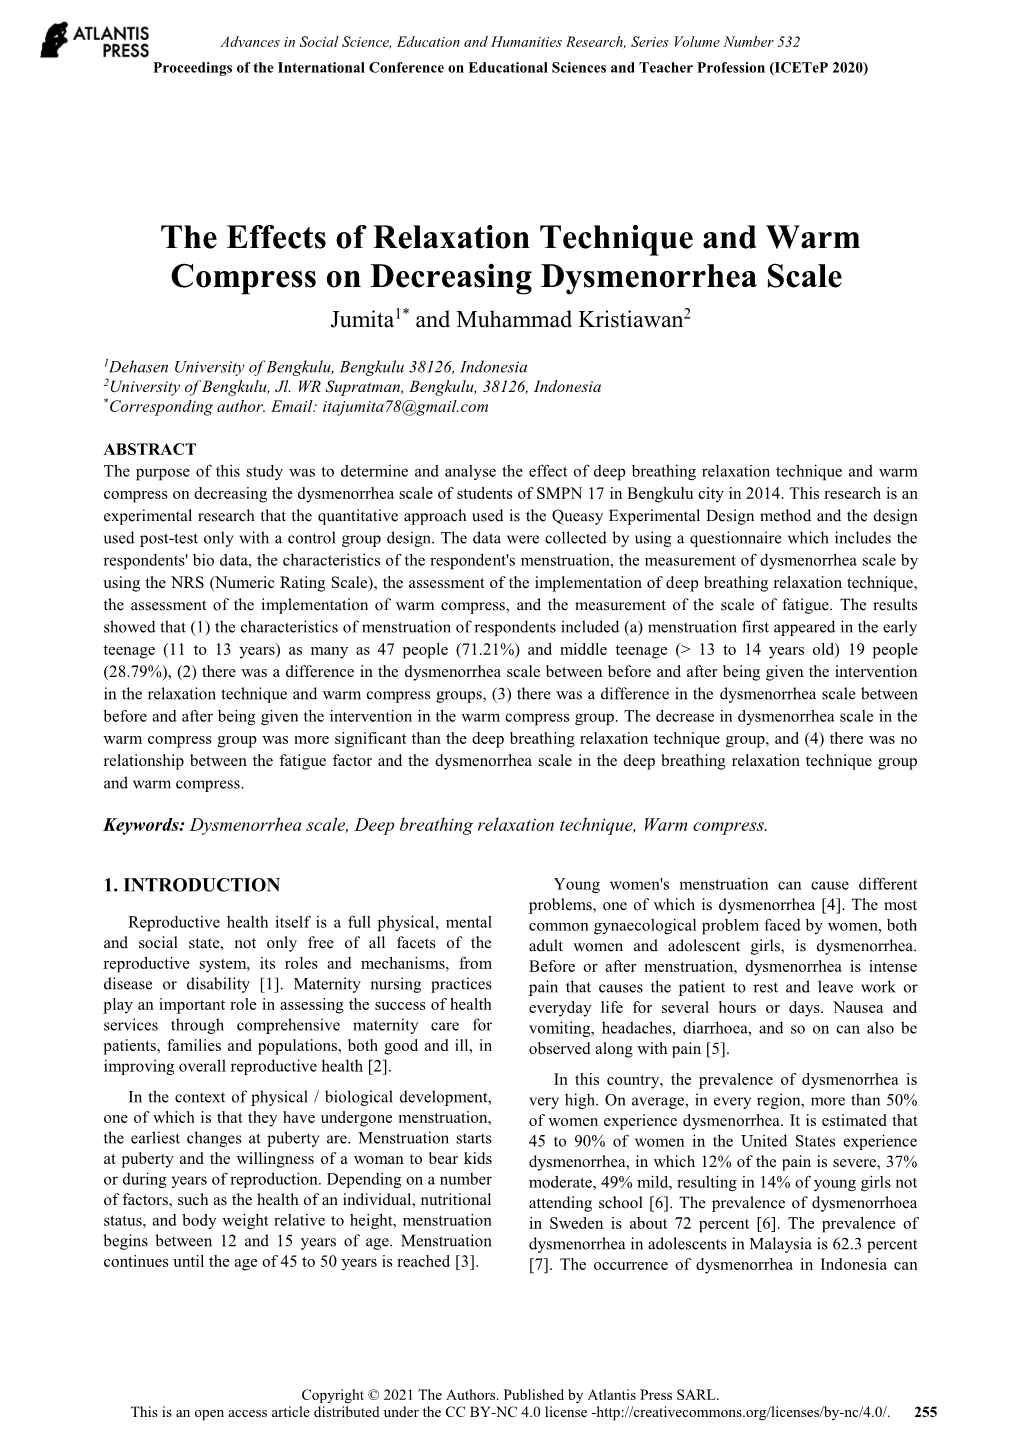 The Effects of Relaxation Technique and Warm Compress on Decreasing Dysmenorrhea Scale Jumita1* and Muhammad Kristiawan2